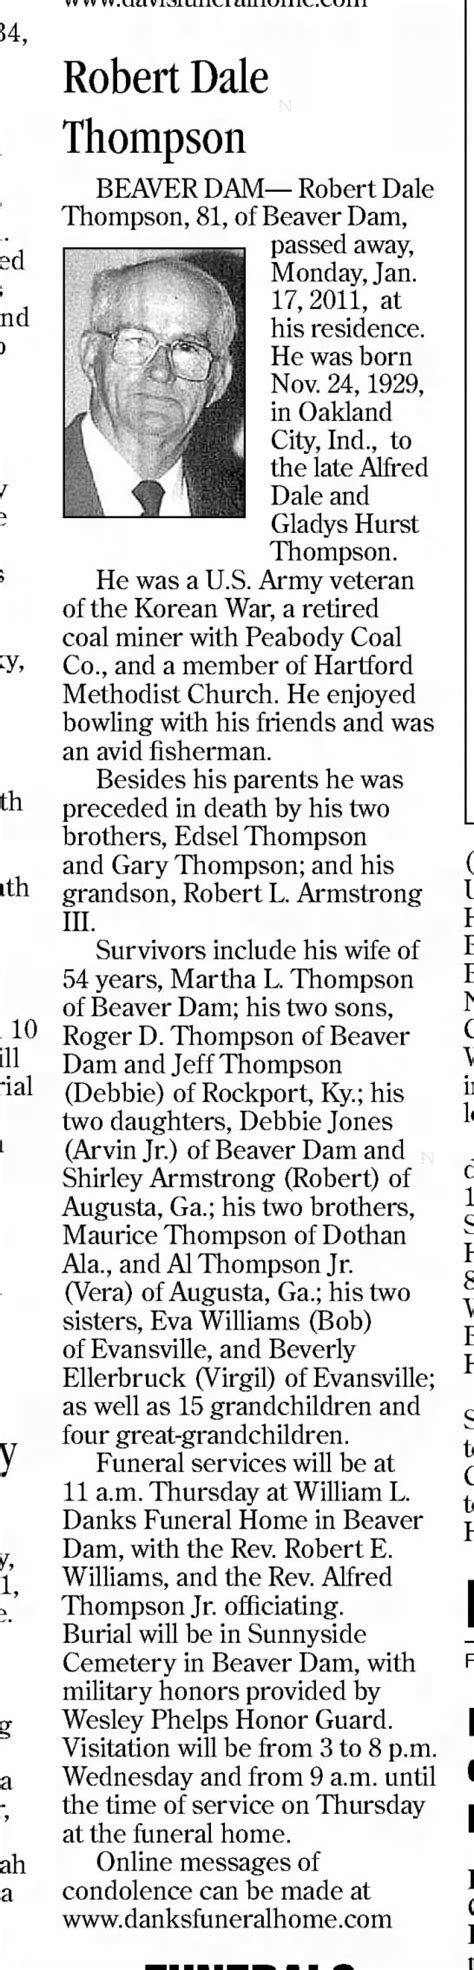 Messenger Inquirer Obituaries Owensboro, Kentucky Browse by Last Name starting with A B C D E F G H I J K L M N O P Q R S T U V W X Y Z Browse or search for obituaries in the Messenger Inquirer (Owensboro, Kentucky) on Ancestry®.. 